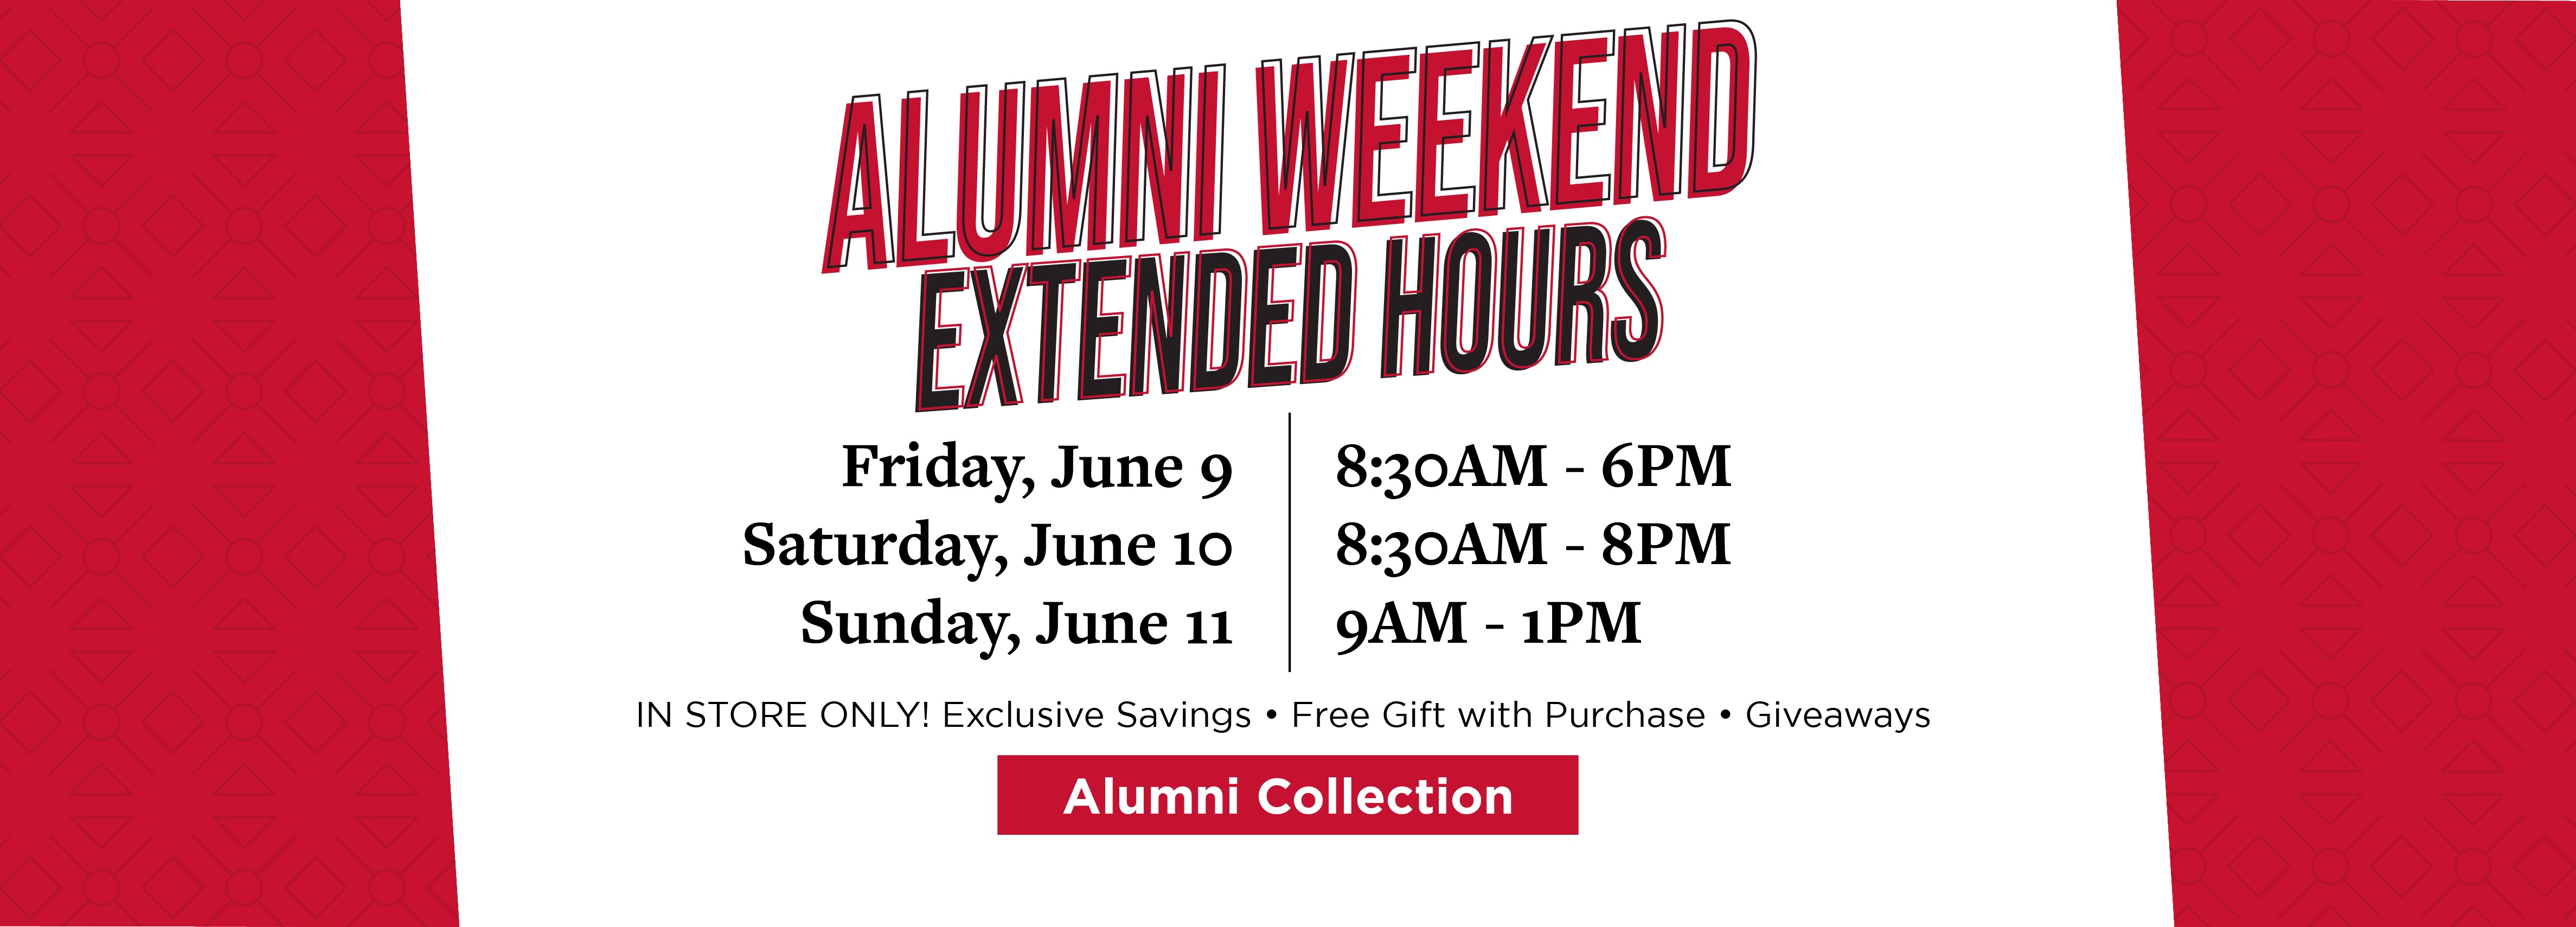 ALUMNI WEEKEND EXTENDED HOURS Friday, June 9 8:30AM - 6PM Saturday, June 10 8:30AM - 8PM Sundav, June 11 9AM - 1PM IN STORE ONLY! Exclusive Savings. Free Gift with Purchase. Giveaways Alumni Collection